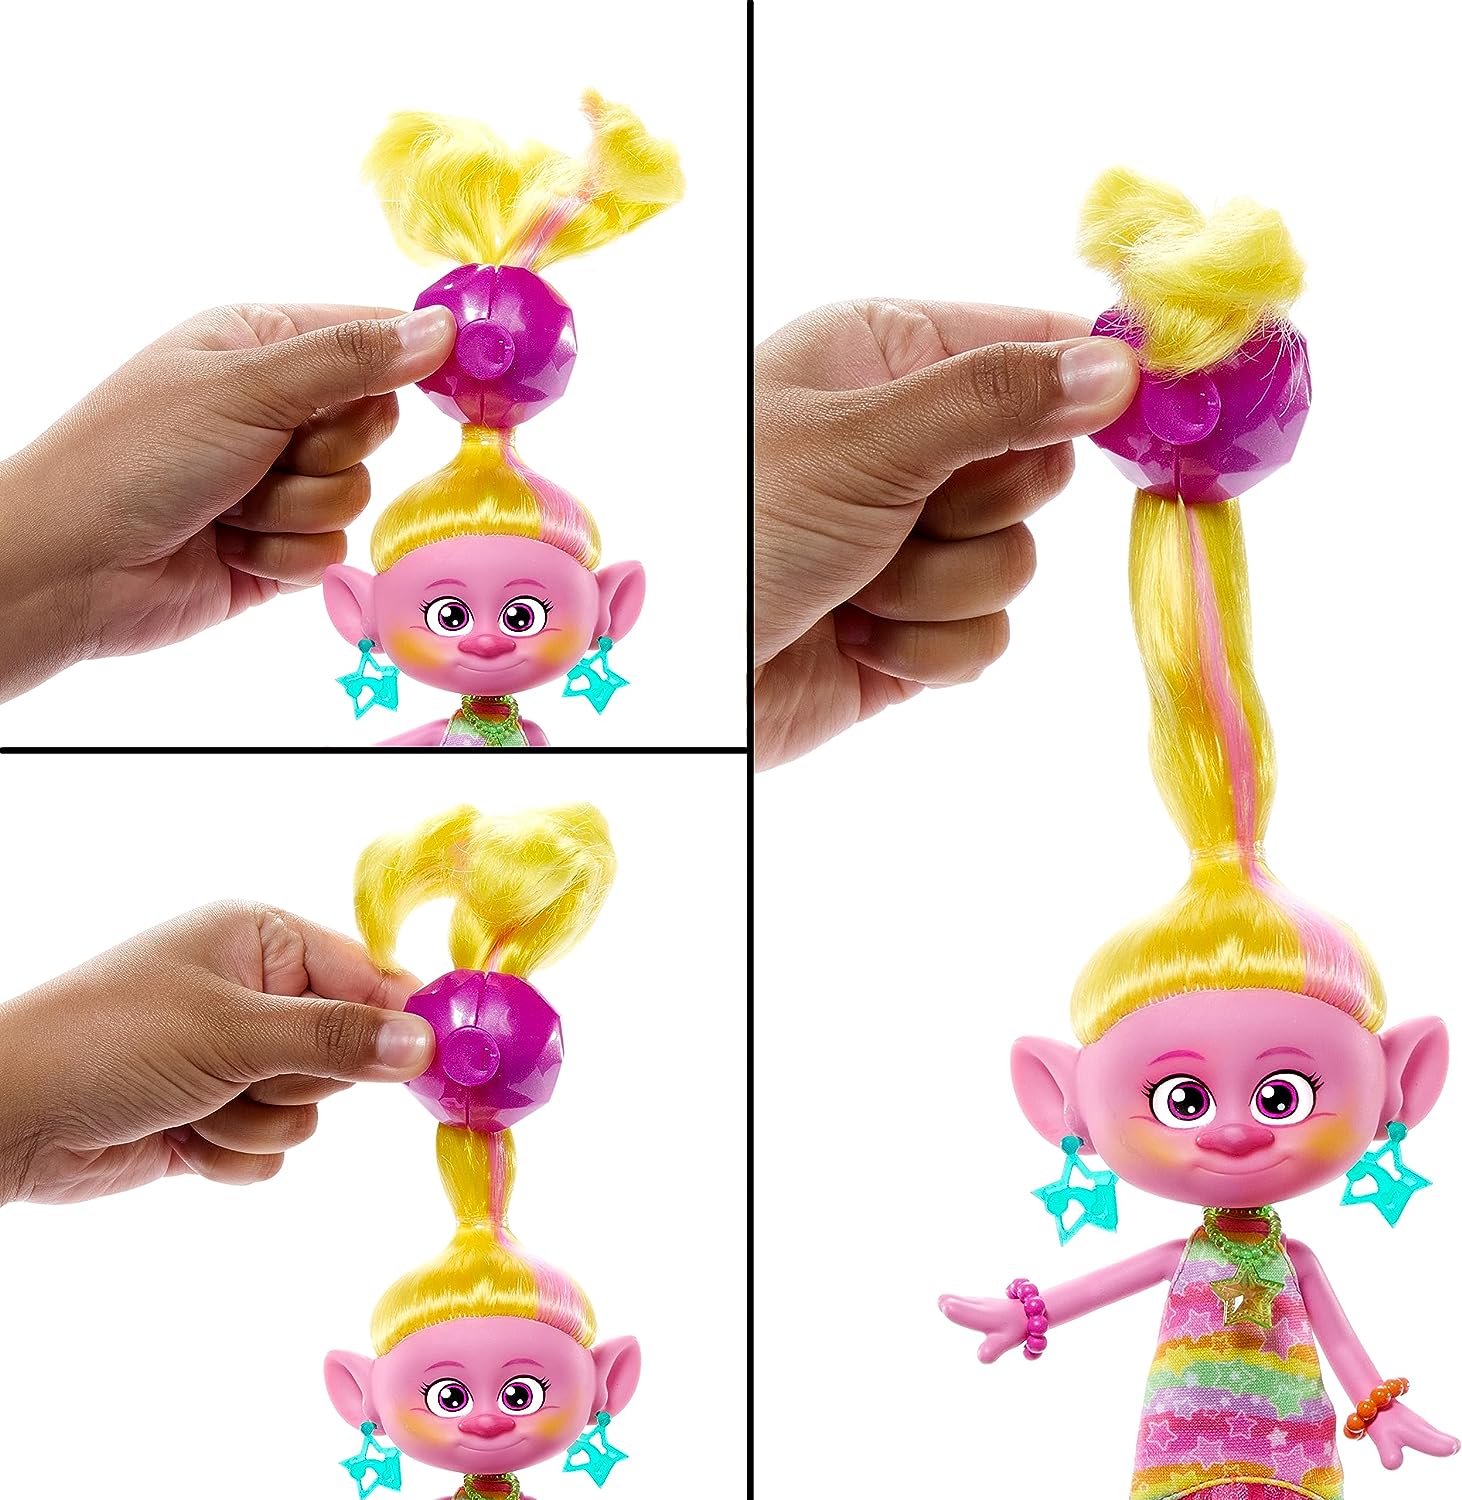 Trolls Band Together Hairsational Reveals dolls Queen Poppy and Viva ...